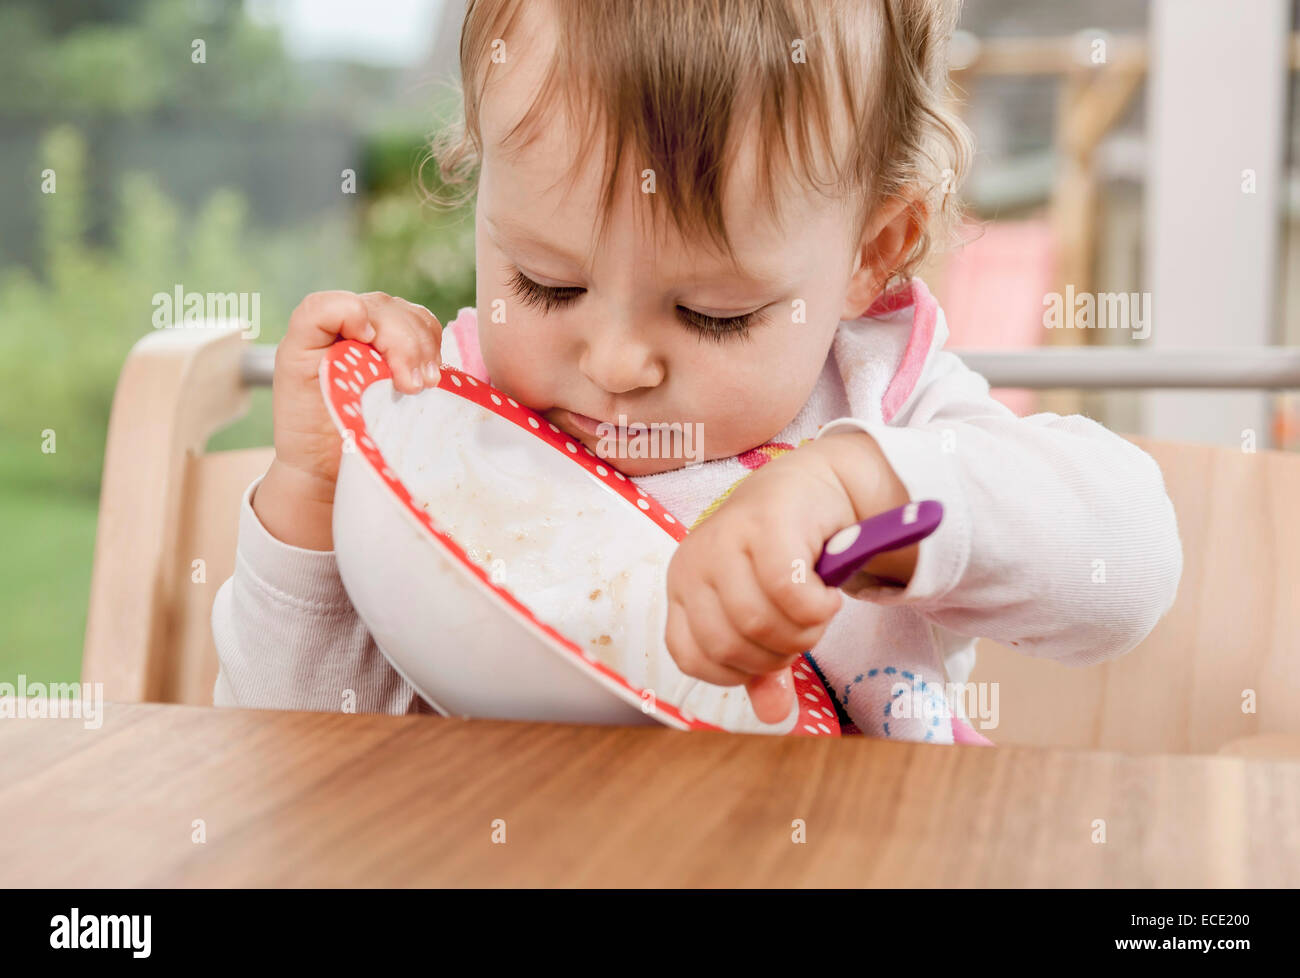 Hungry baby girl 1 year old bowl eating Stock Photo